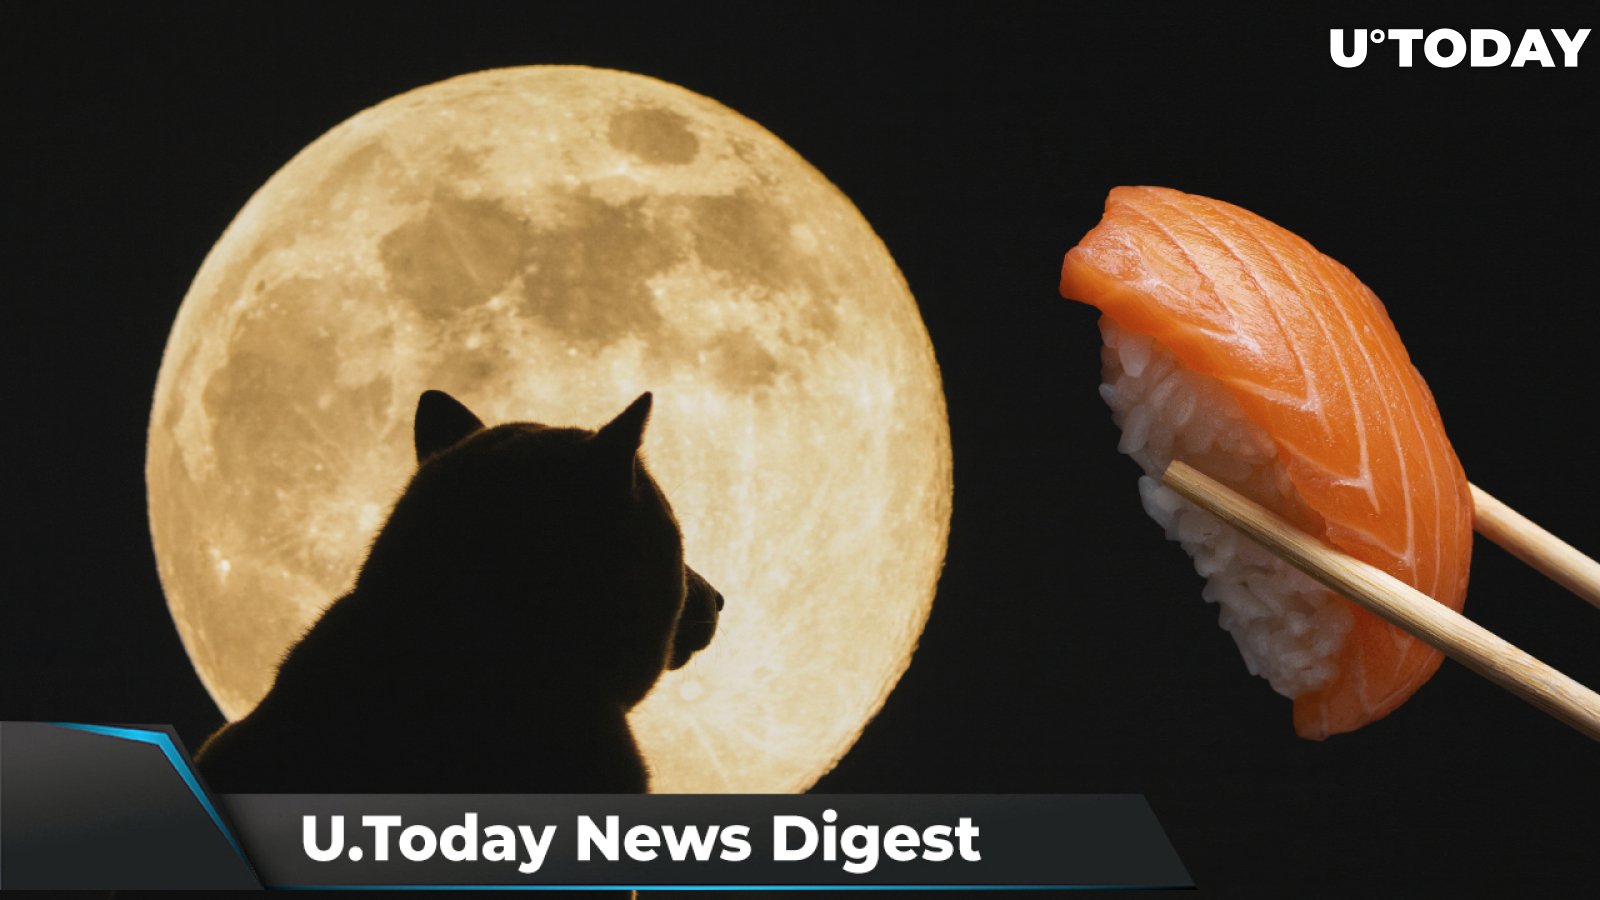 Travala Accepts Shiba Inu, Details About Drama at SushiSwap Revealed, Whale Buys 99 Billion SHIB: Crypto News Digest by U.Today